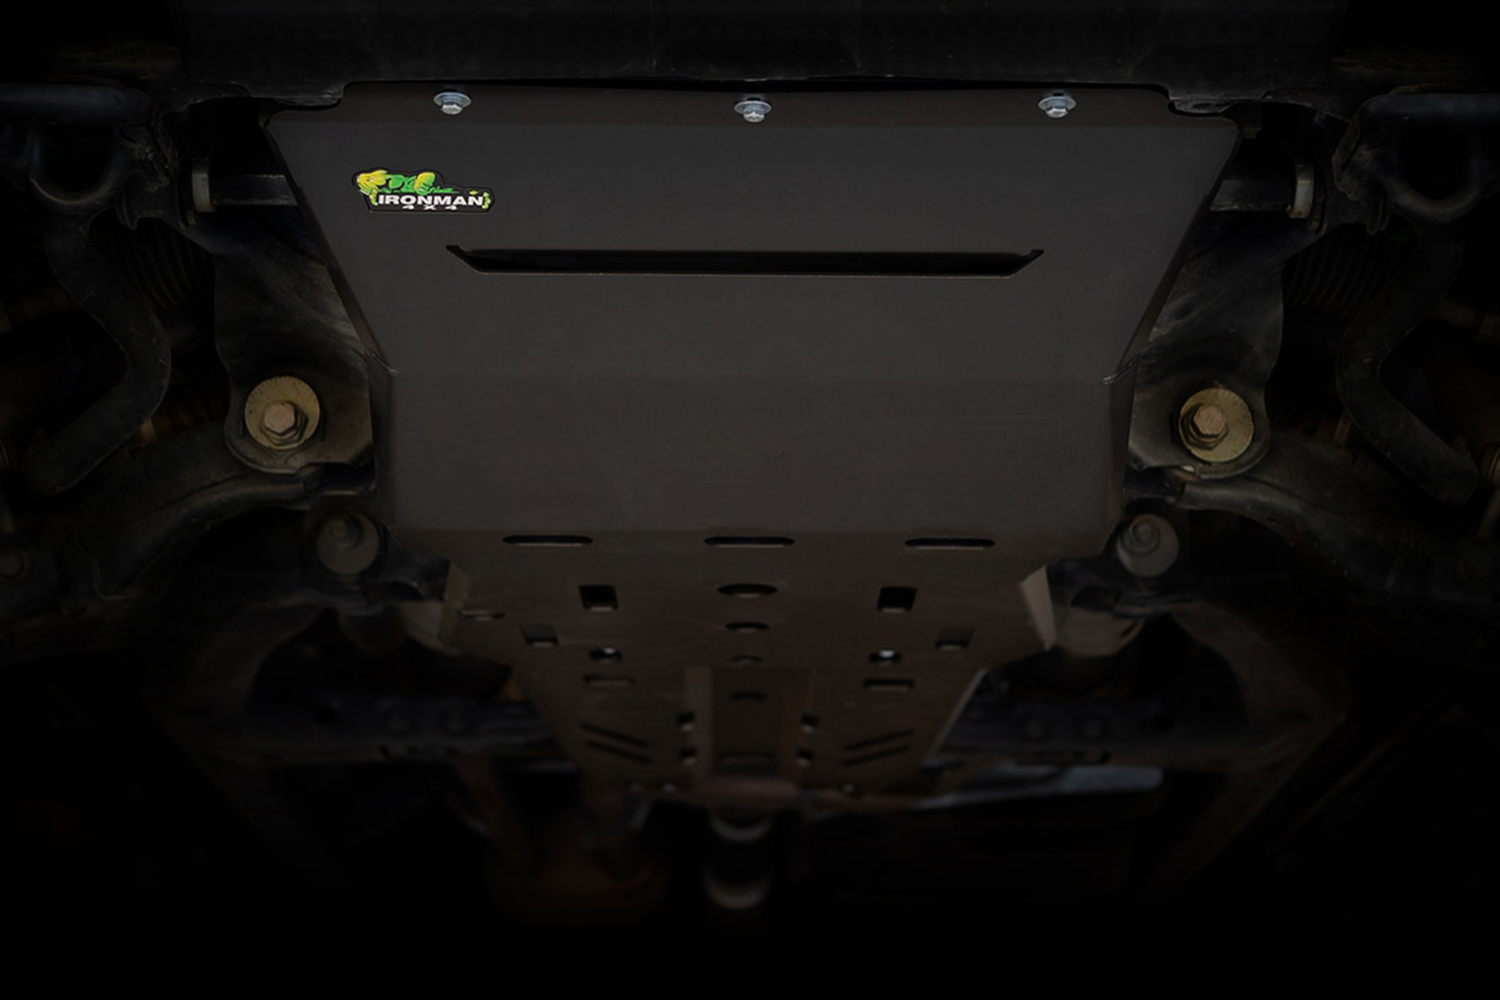 Does this skid plate kit go far enough back to cover the transfer case?